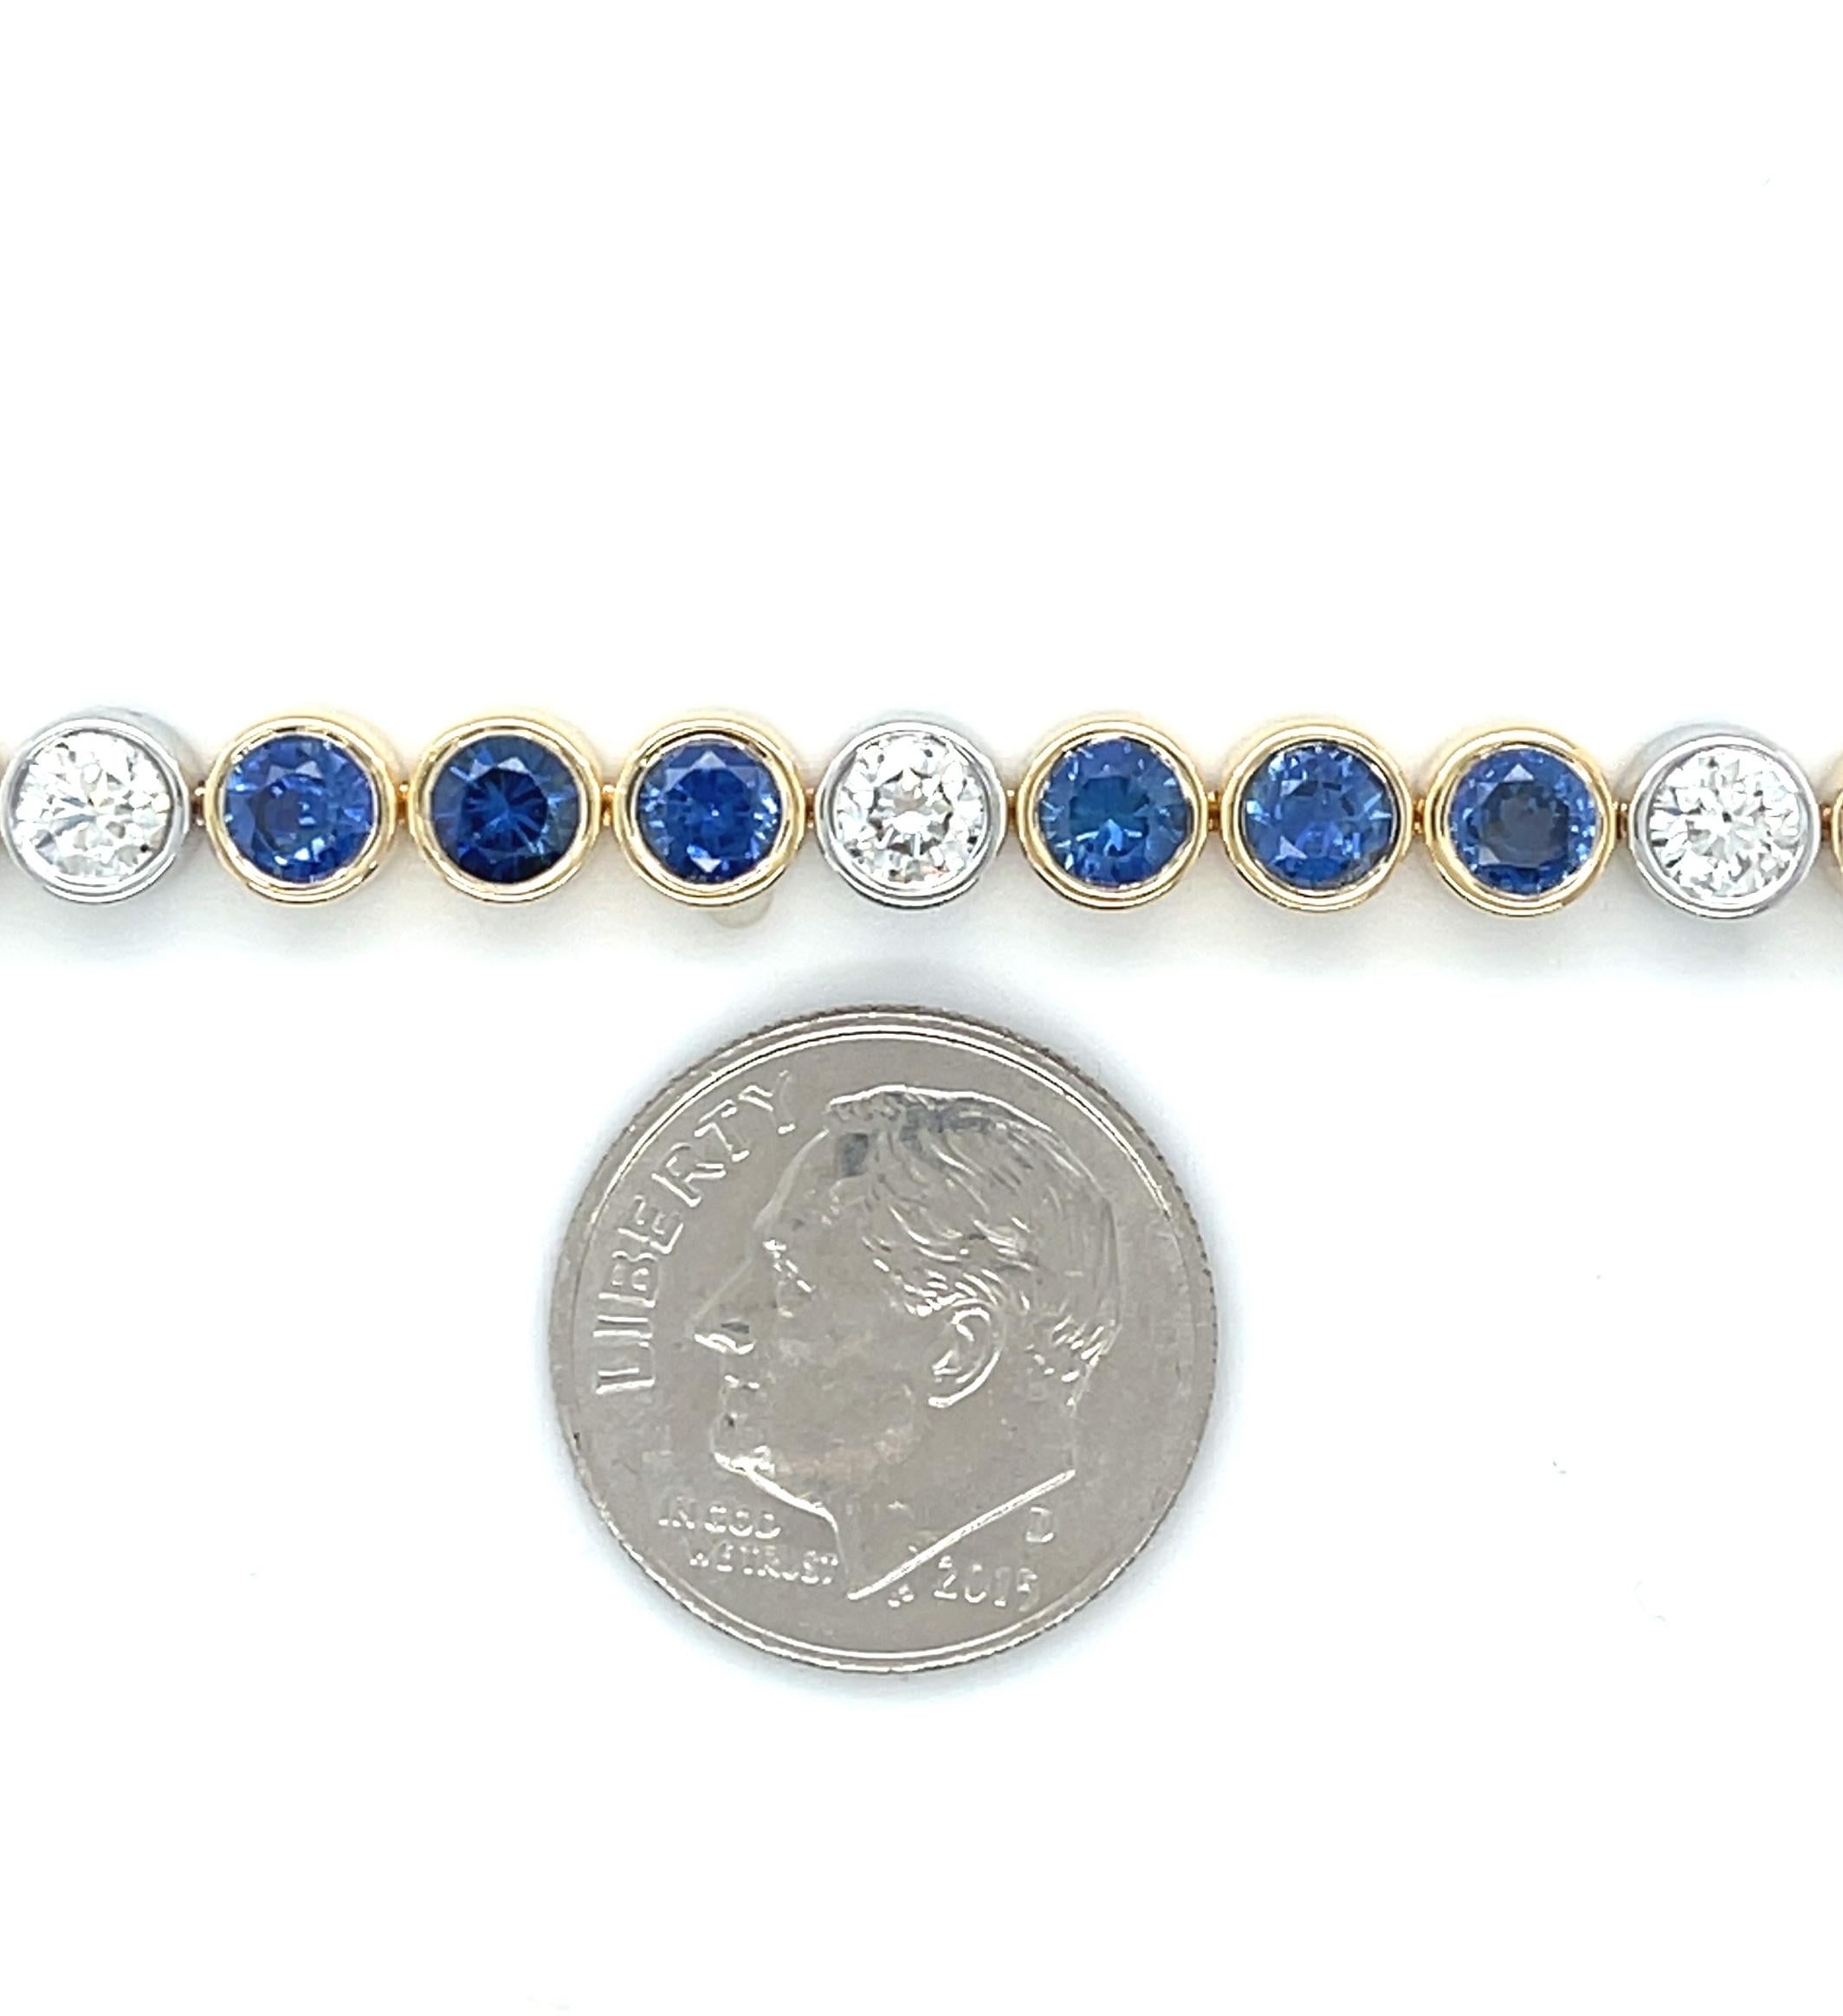  Blue Sapphire and Diamond Tennis Bracelet in 18k Gold, 7.49 Carats Total For Sale 1